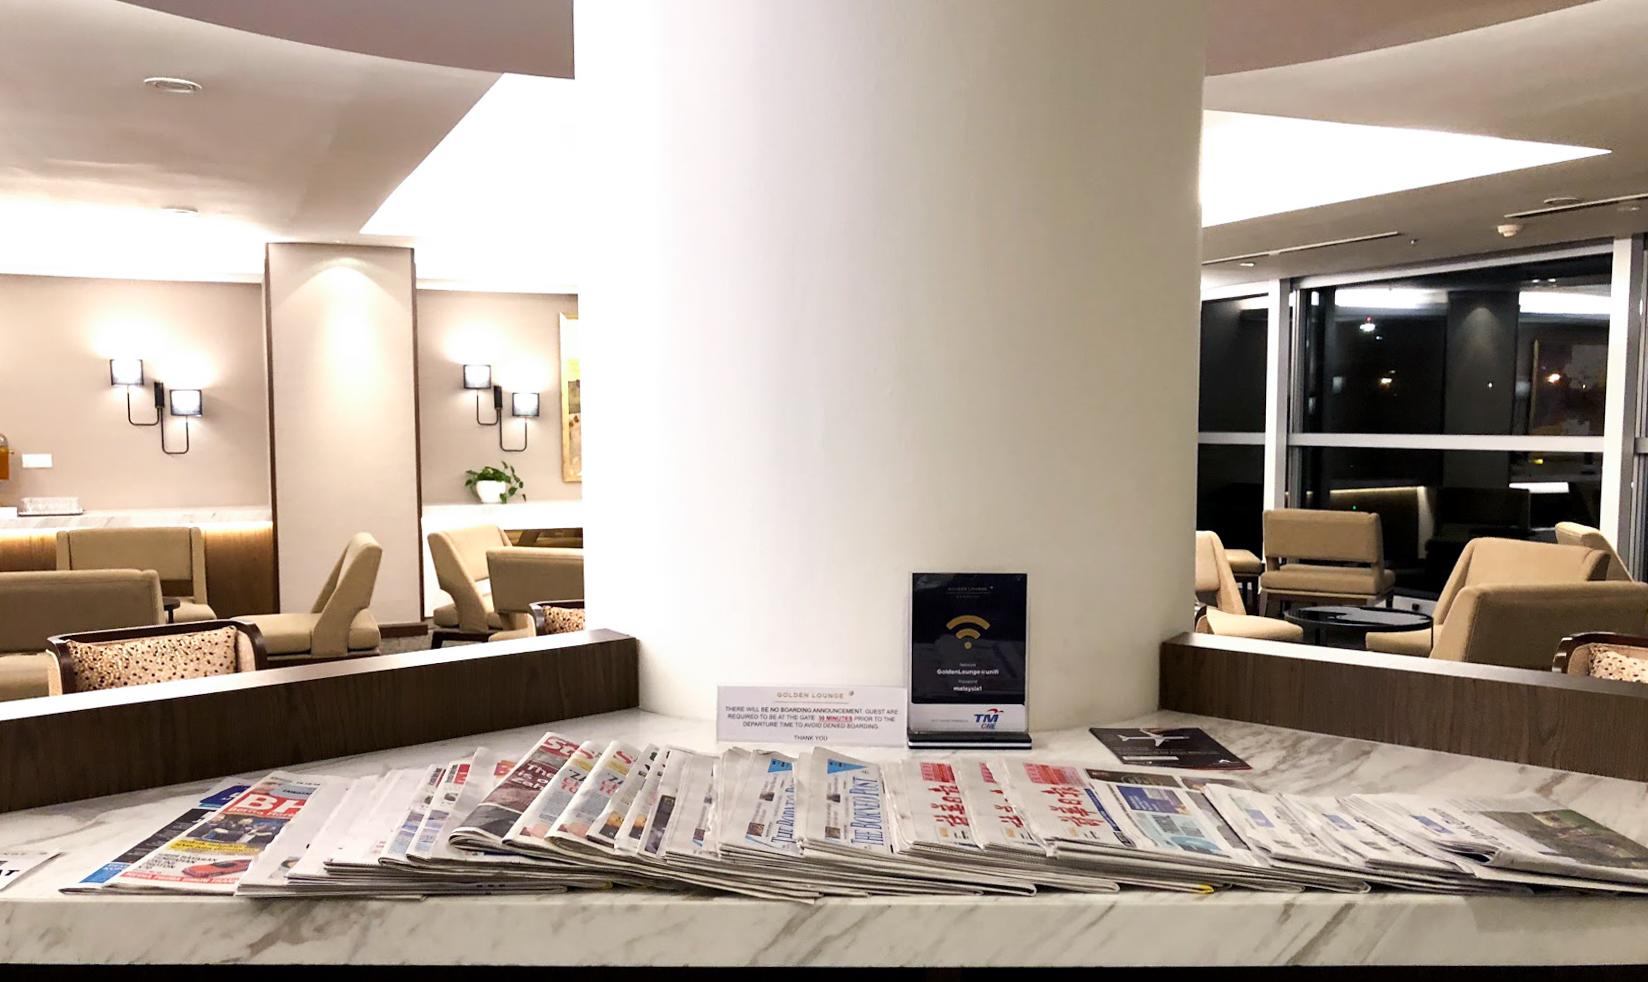 Malaysia Airlines Domestic Golden Lounge Kuala Lumpur reading materials